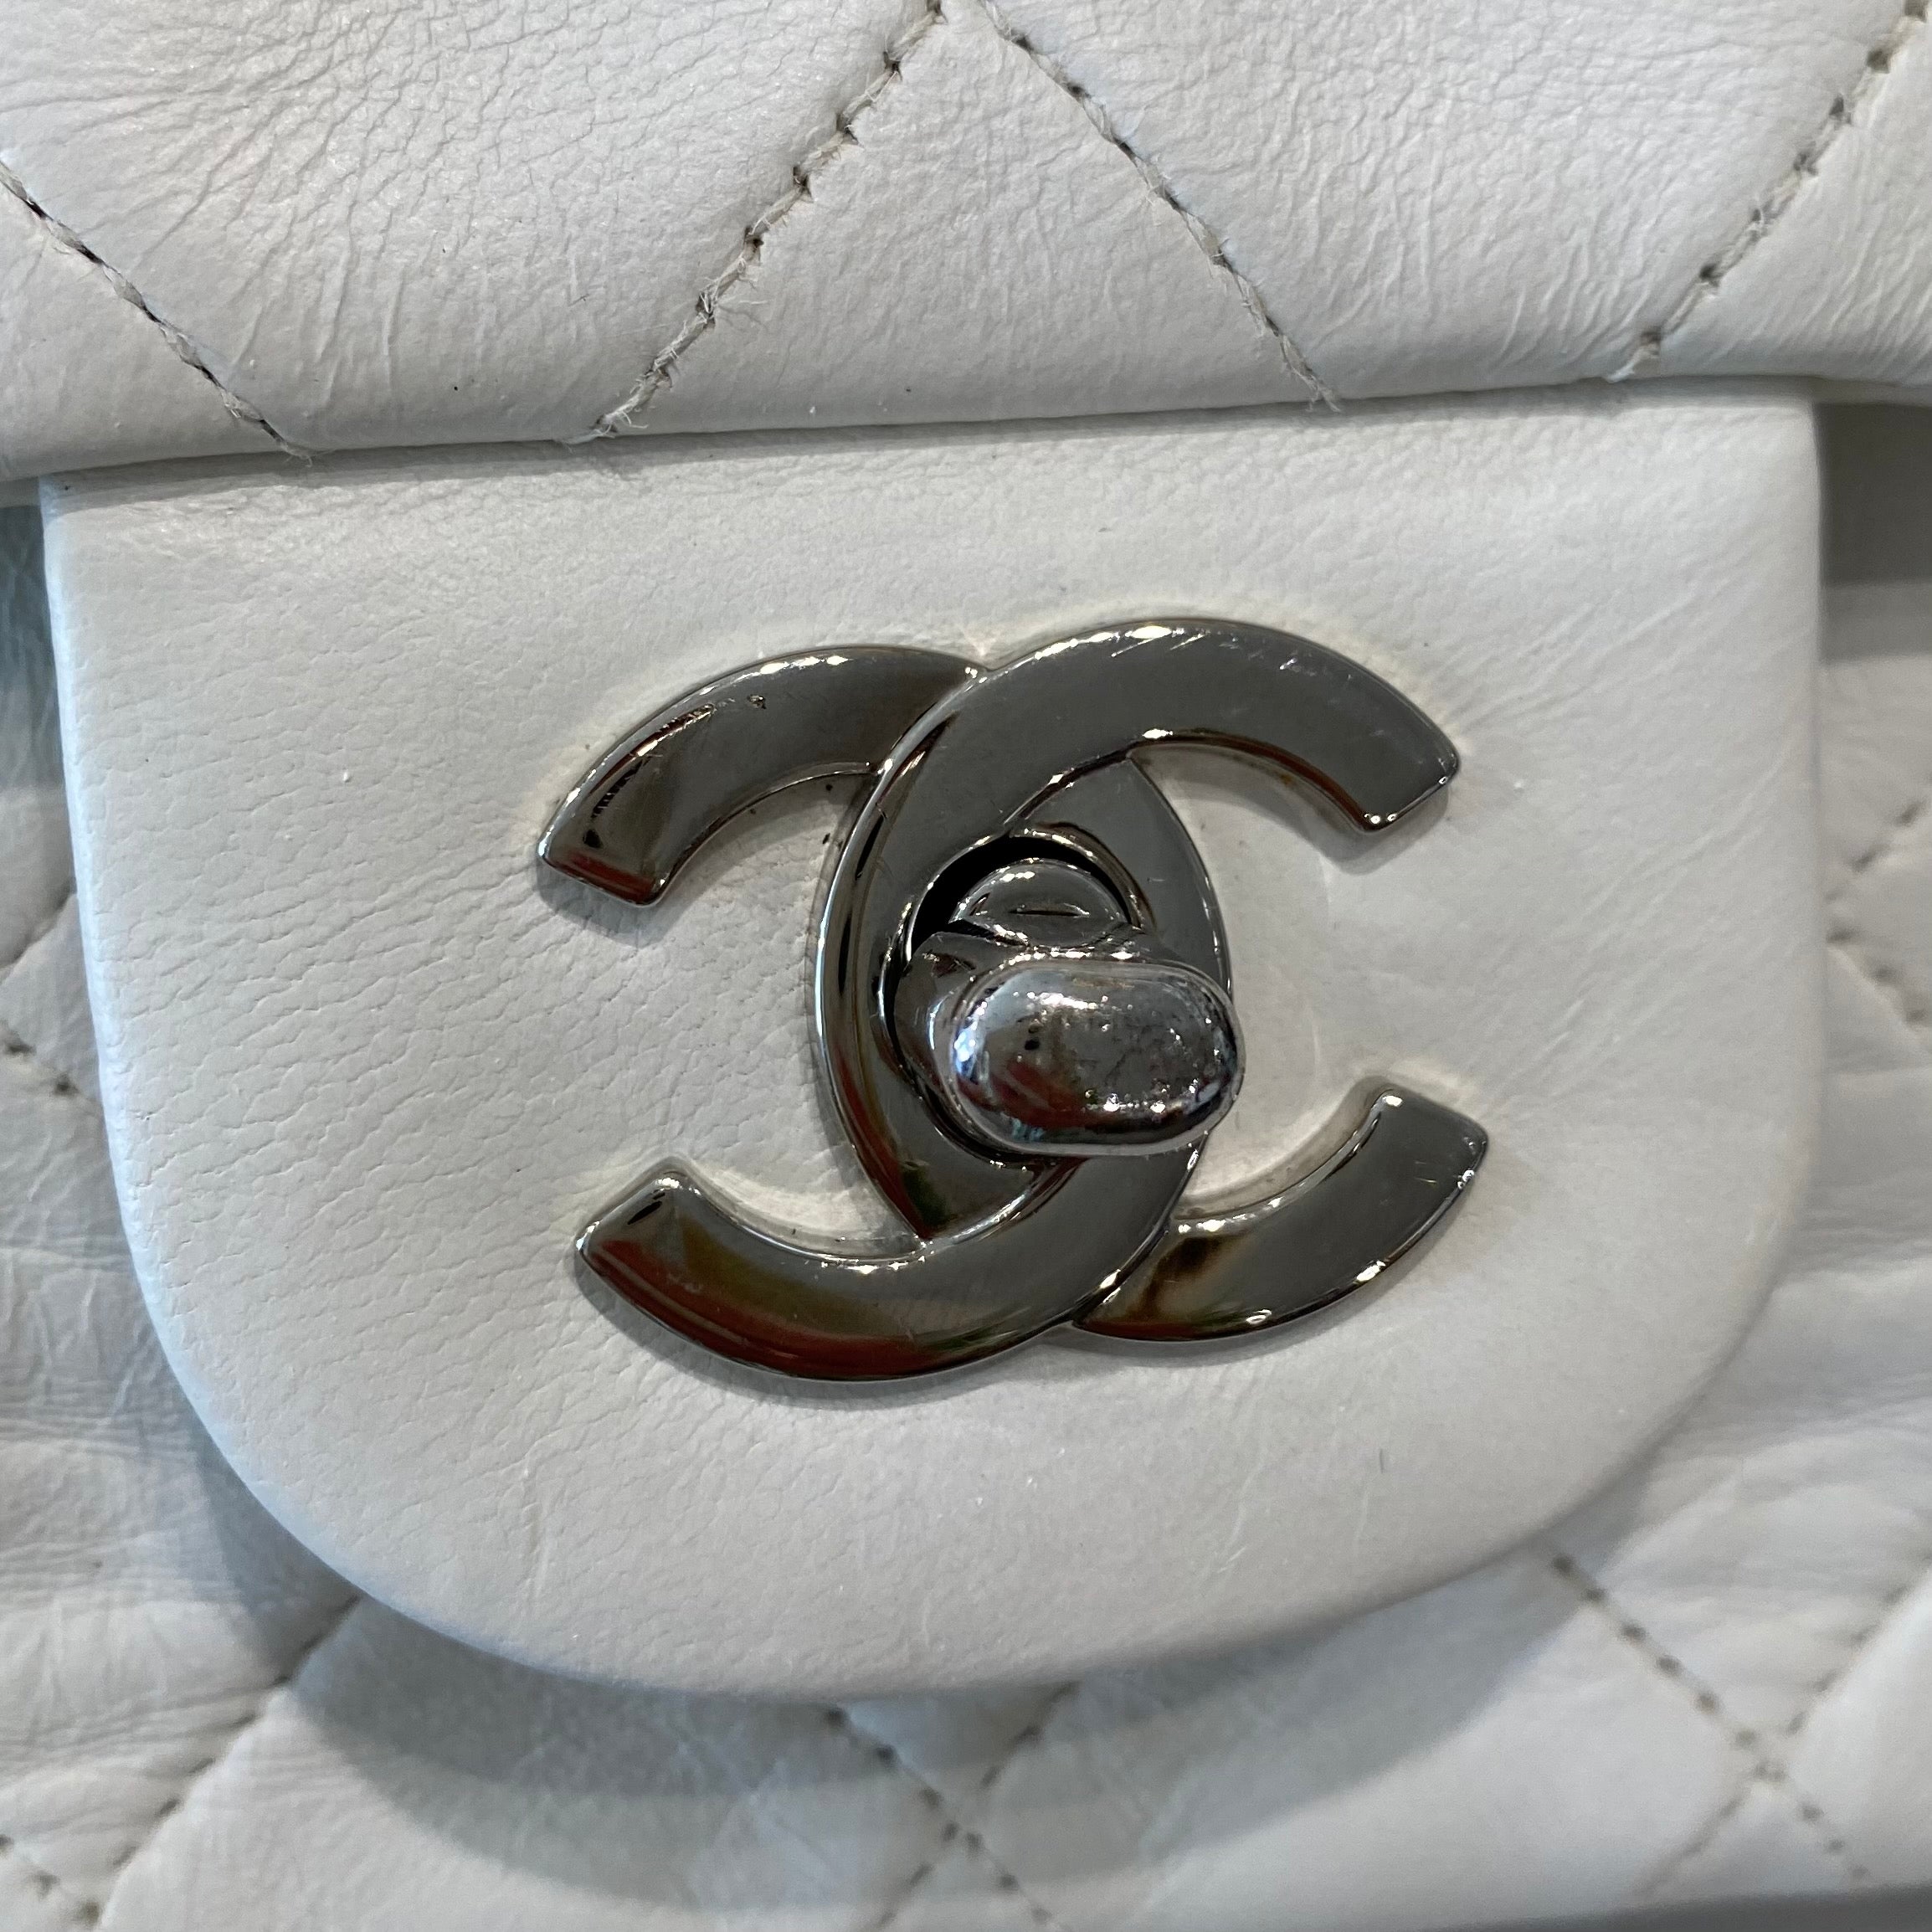 white chanel bag with silver hardware